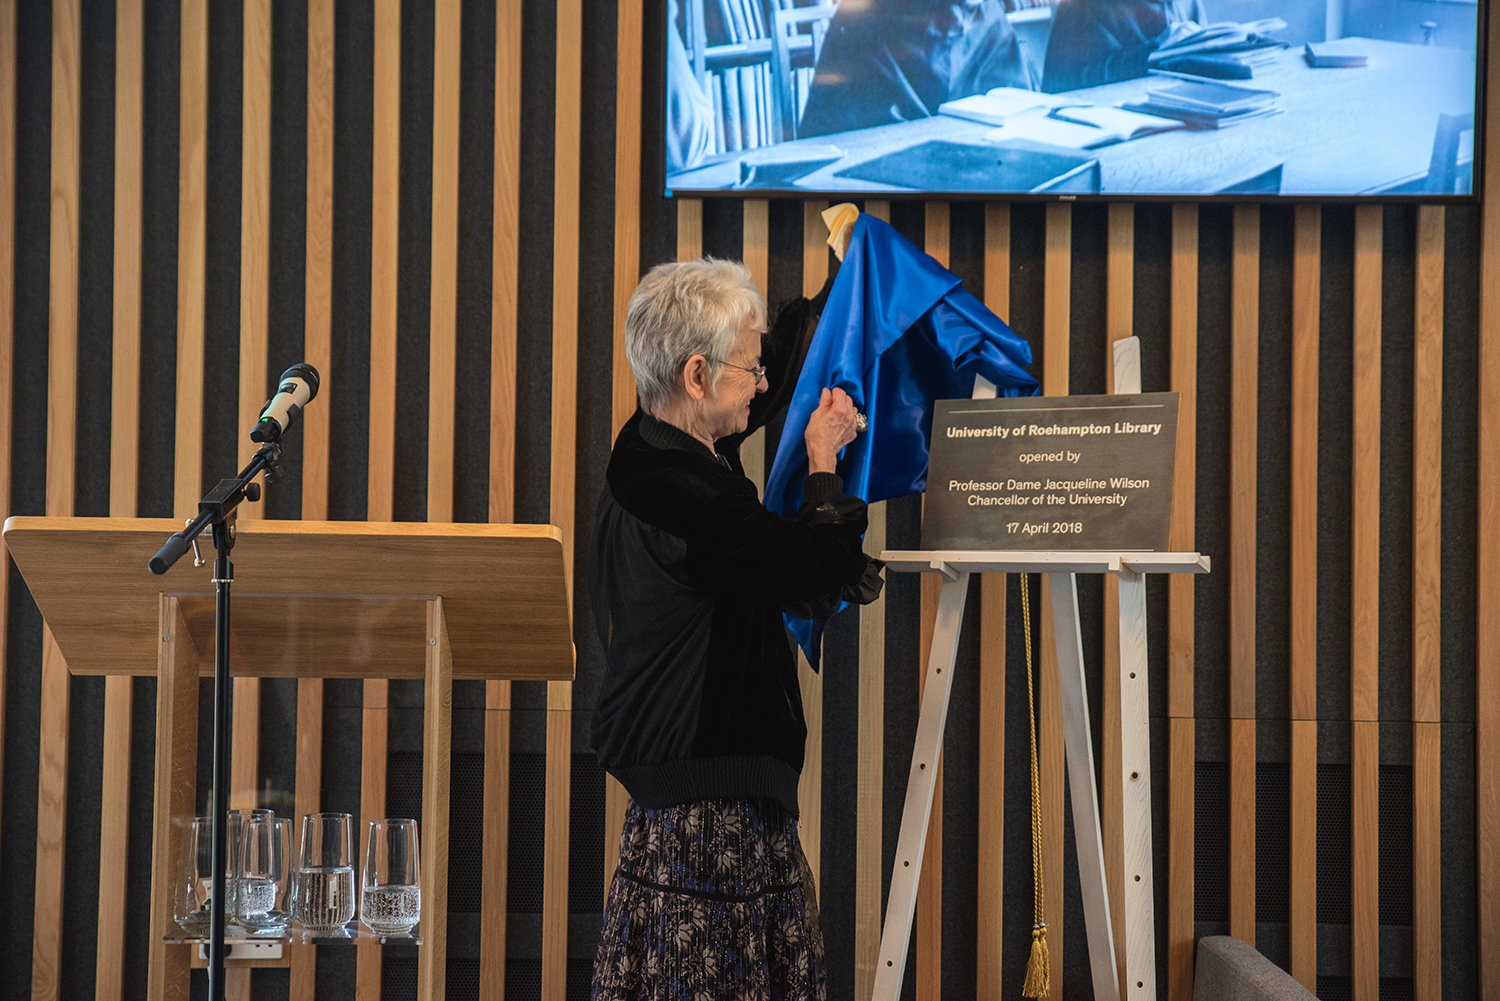 Image - New Library officially opened by University’s Chancellor, Dame Jacqueline Wilson